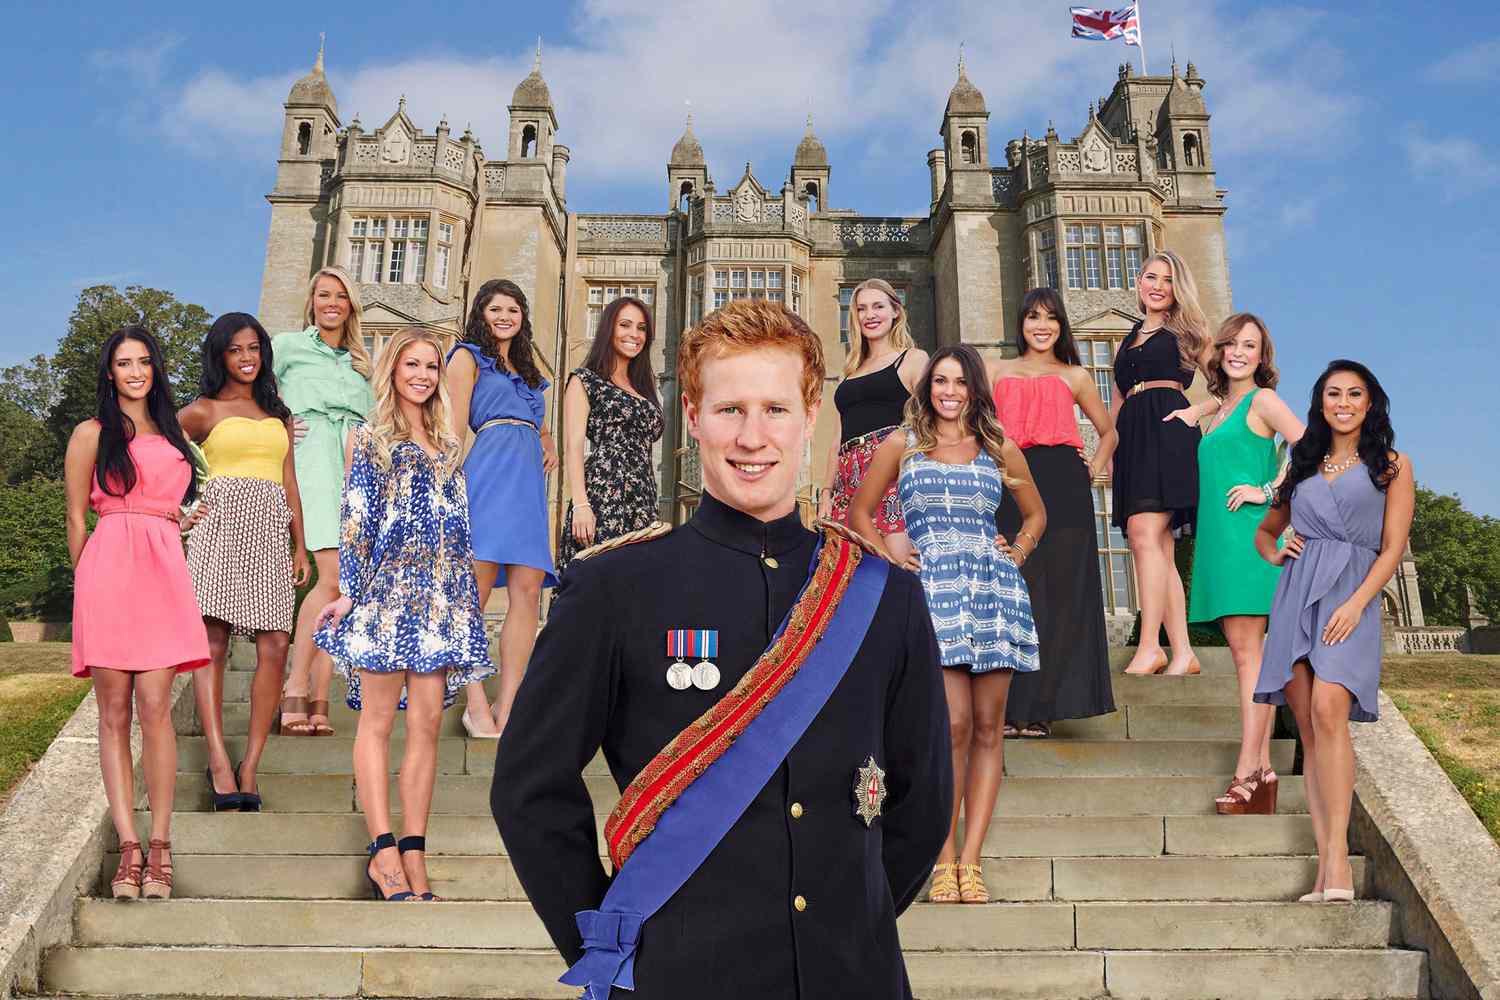 promo picture of 12 female contestants and guy posing as Prince Harry